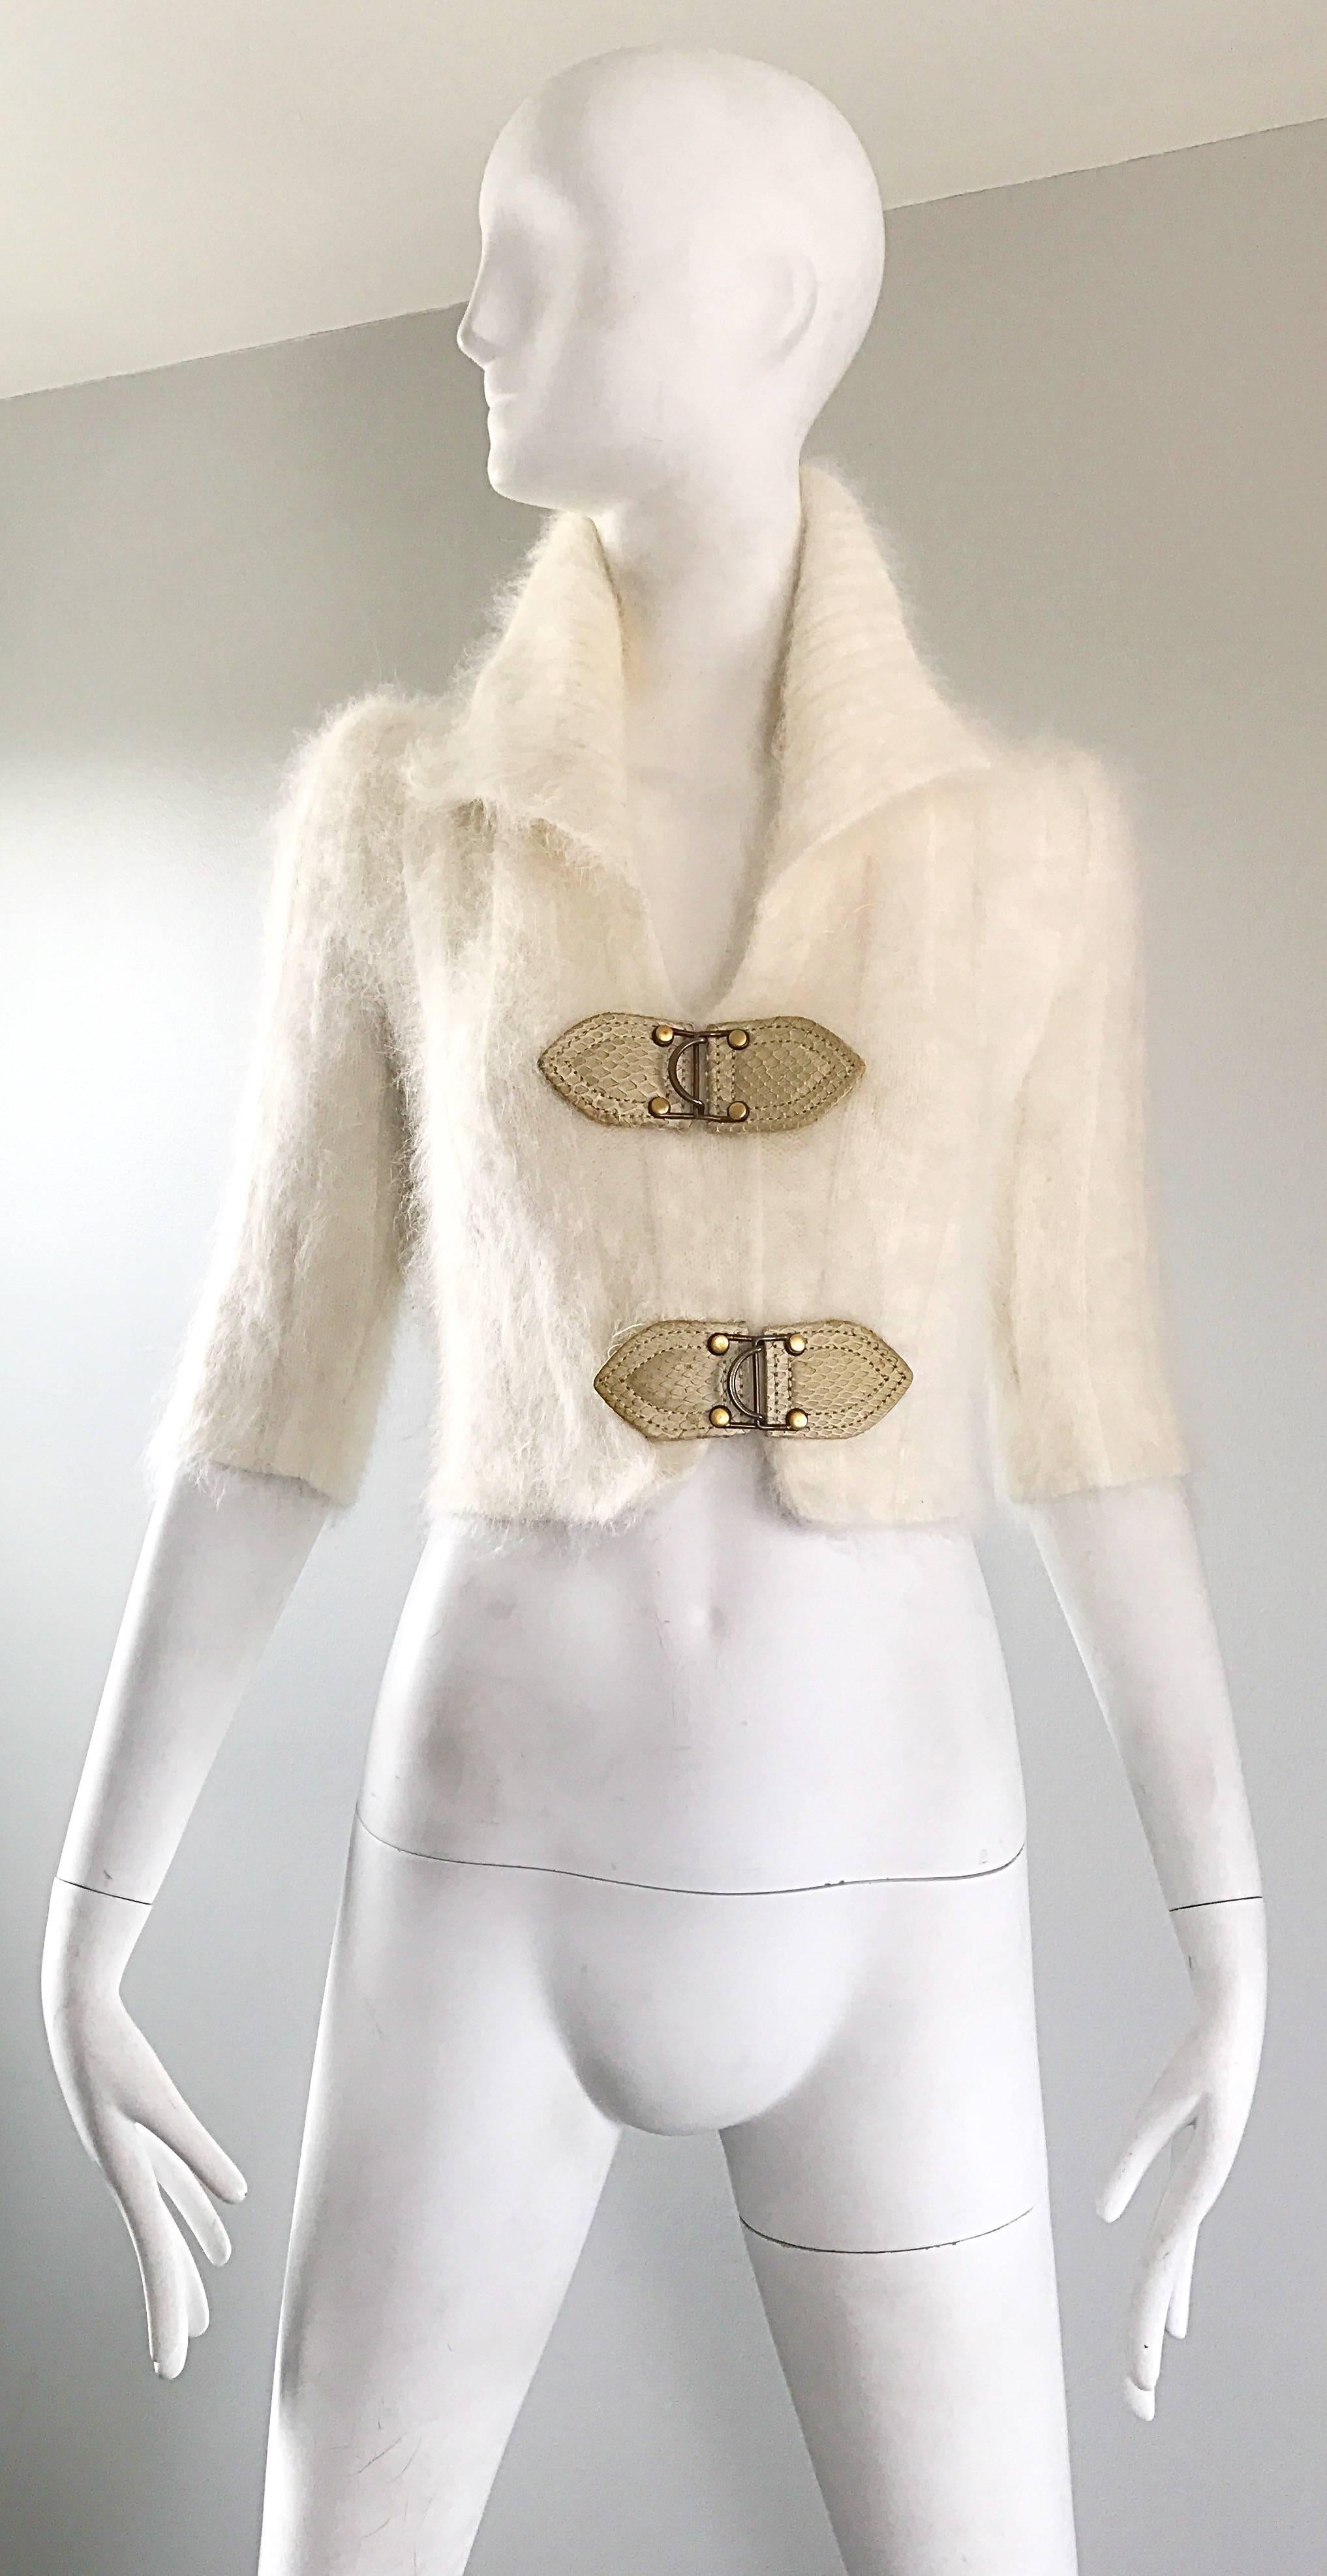 Chic ZAC POSEN ivory / off-white 3/4 sleeve crop sweater top! Features the softest angora and two beige snakeskin clasps on the bodice. Collar can be worn up, or laying flat. Great with shorts, jeans, trousers or a skirt. 
In great condition. Made